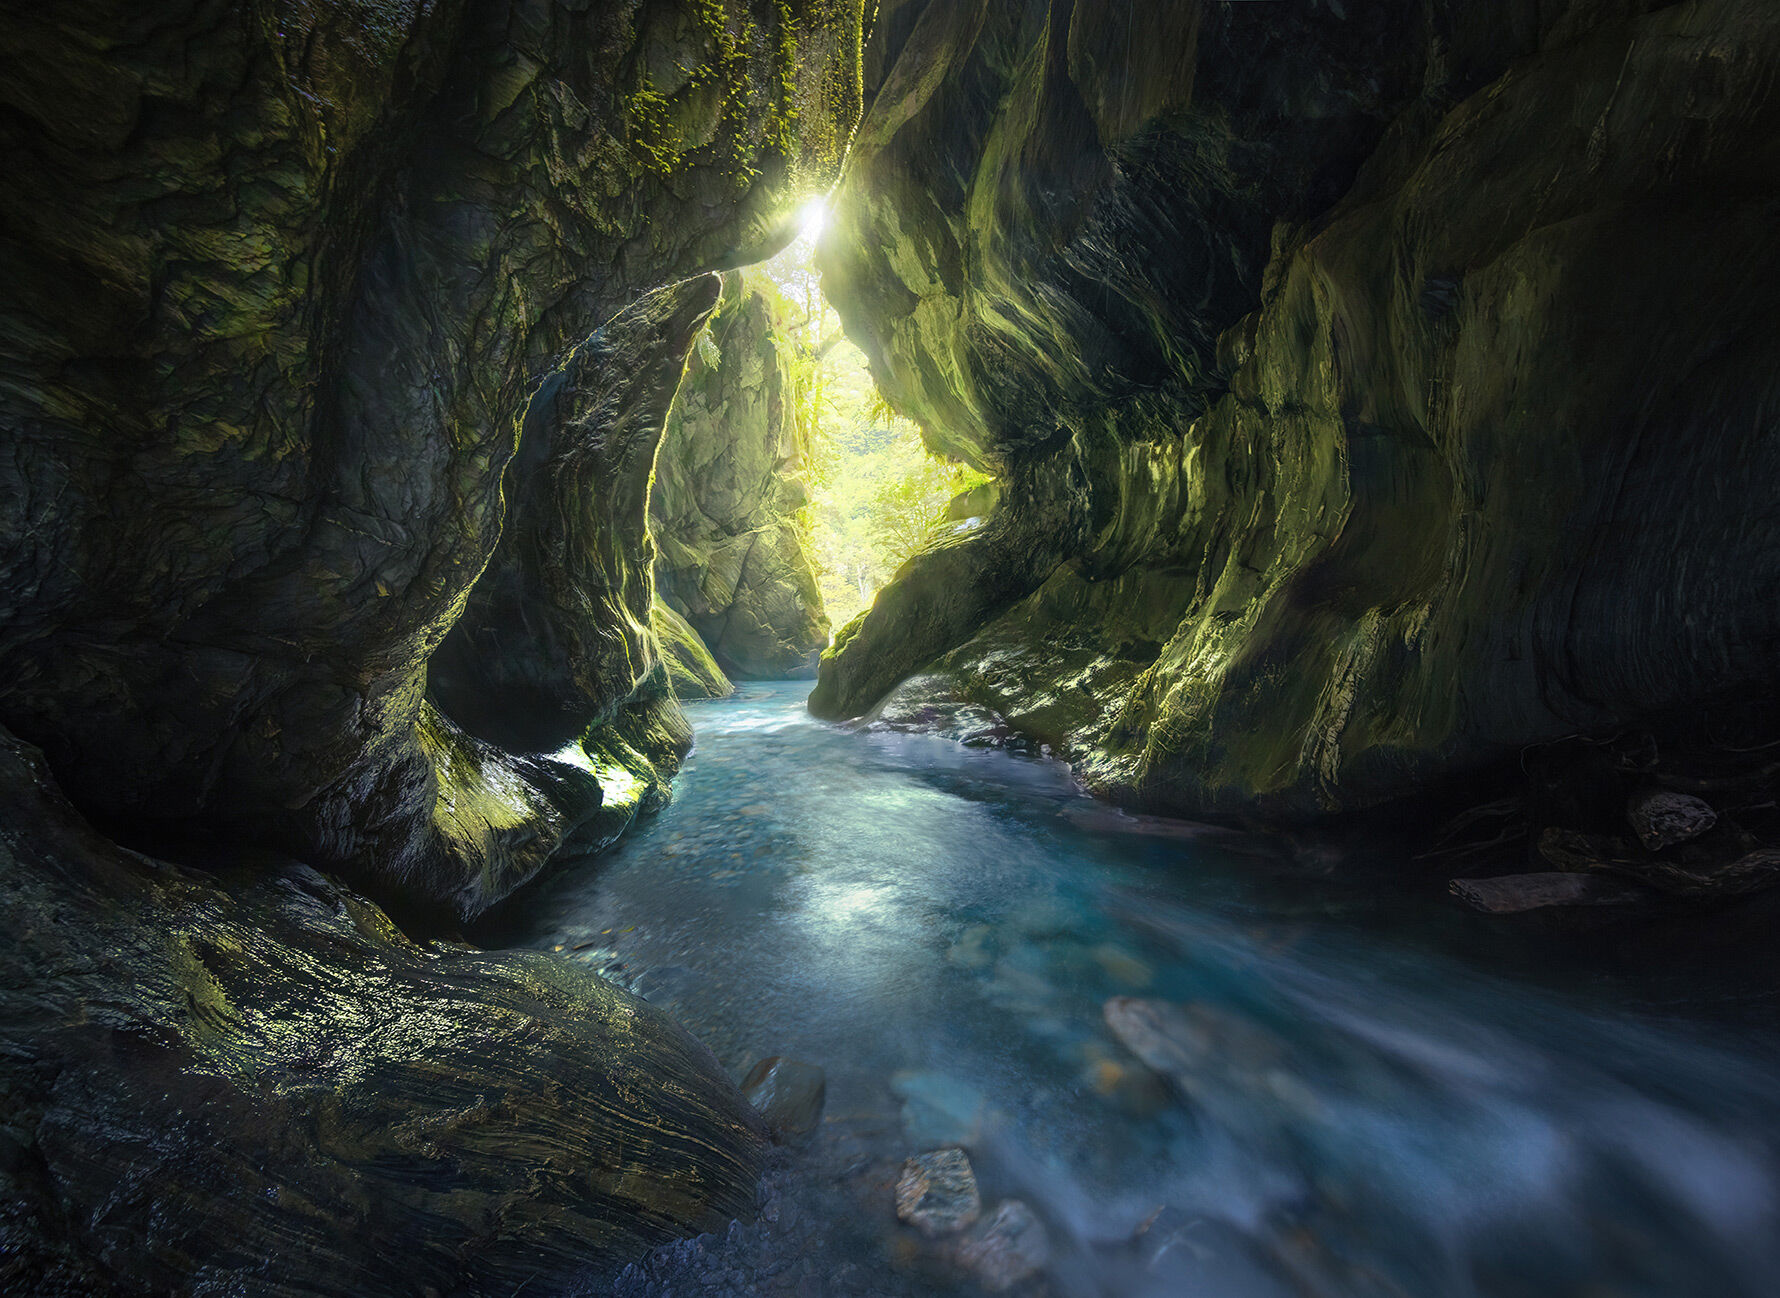 More amazing light in the canyon environment of New Zealand.  Rushing blue waters transport the viewer through walls of shist...